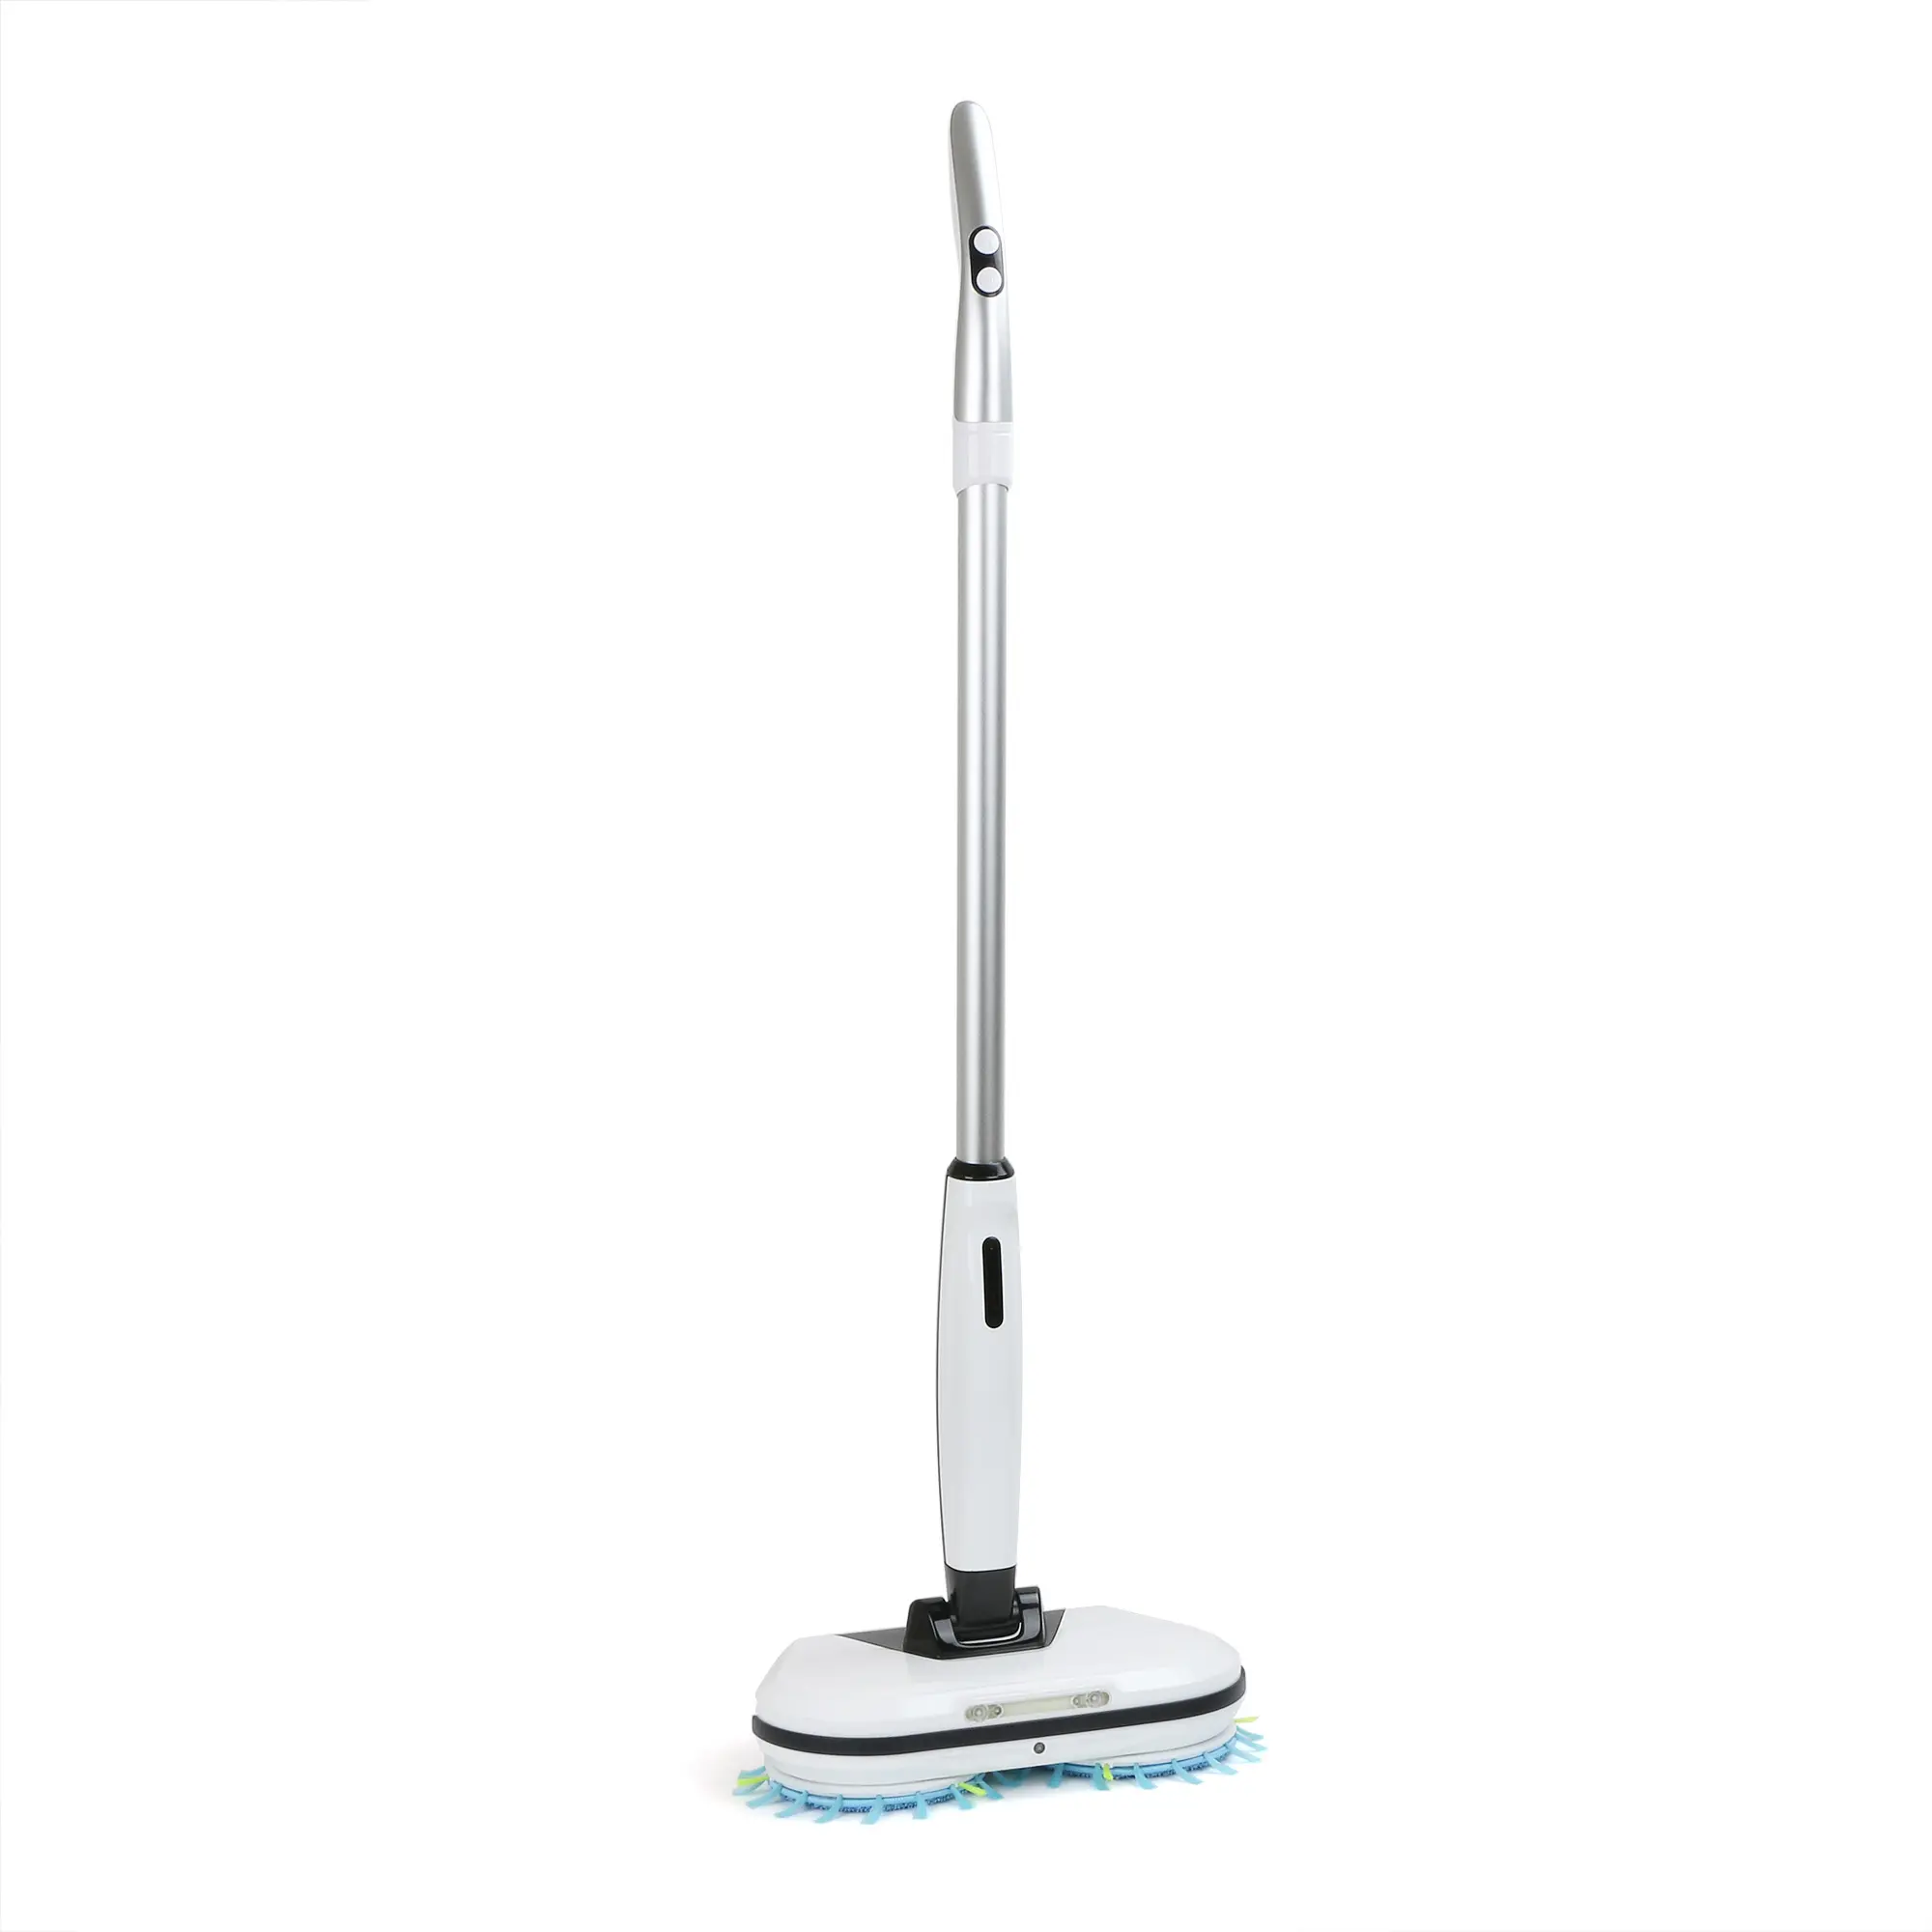 Smart Water Spraying Self Cleaning Light weight Electric Mops For Wood Laminate Floor Cleaning Cordless With Spin Washable Head